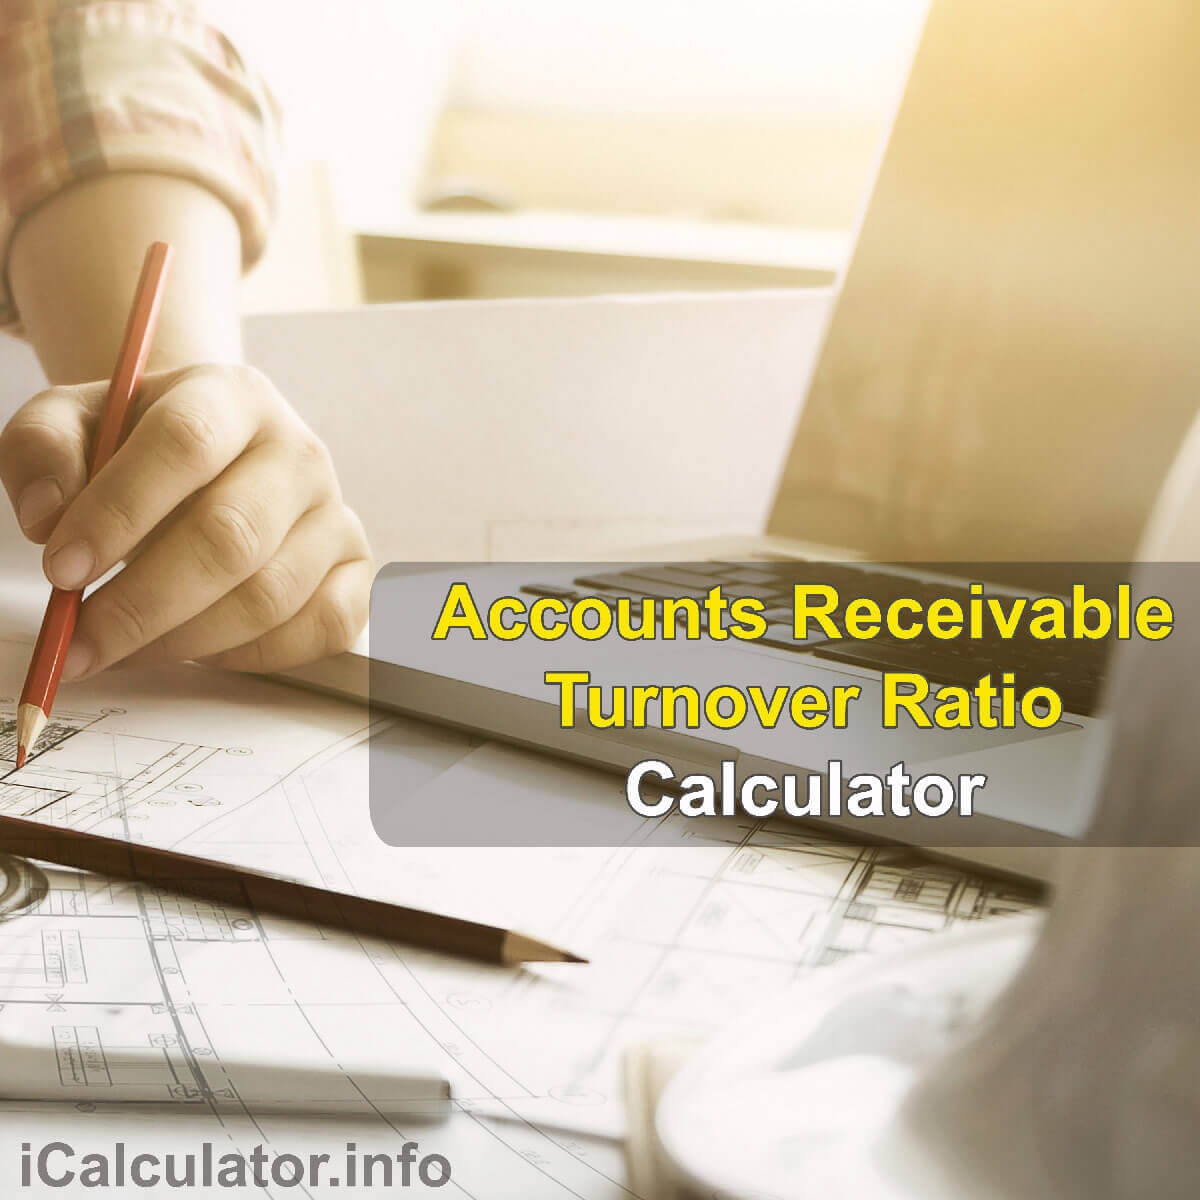 Accounts Receivables Turnover Ratio Calculator. This image provides details of how to calculate the Accounts Receivables Turnover Ratio using a calculator and notepad. By using the Accounts Receivables Turnover Ratio formula, the ARTR Calculator provides a true calculation of the quantify of the effectiveness of your company's ability to collect its credits that are owed by its clients